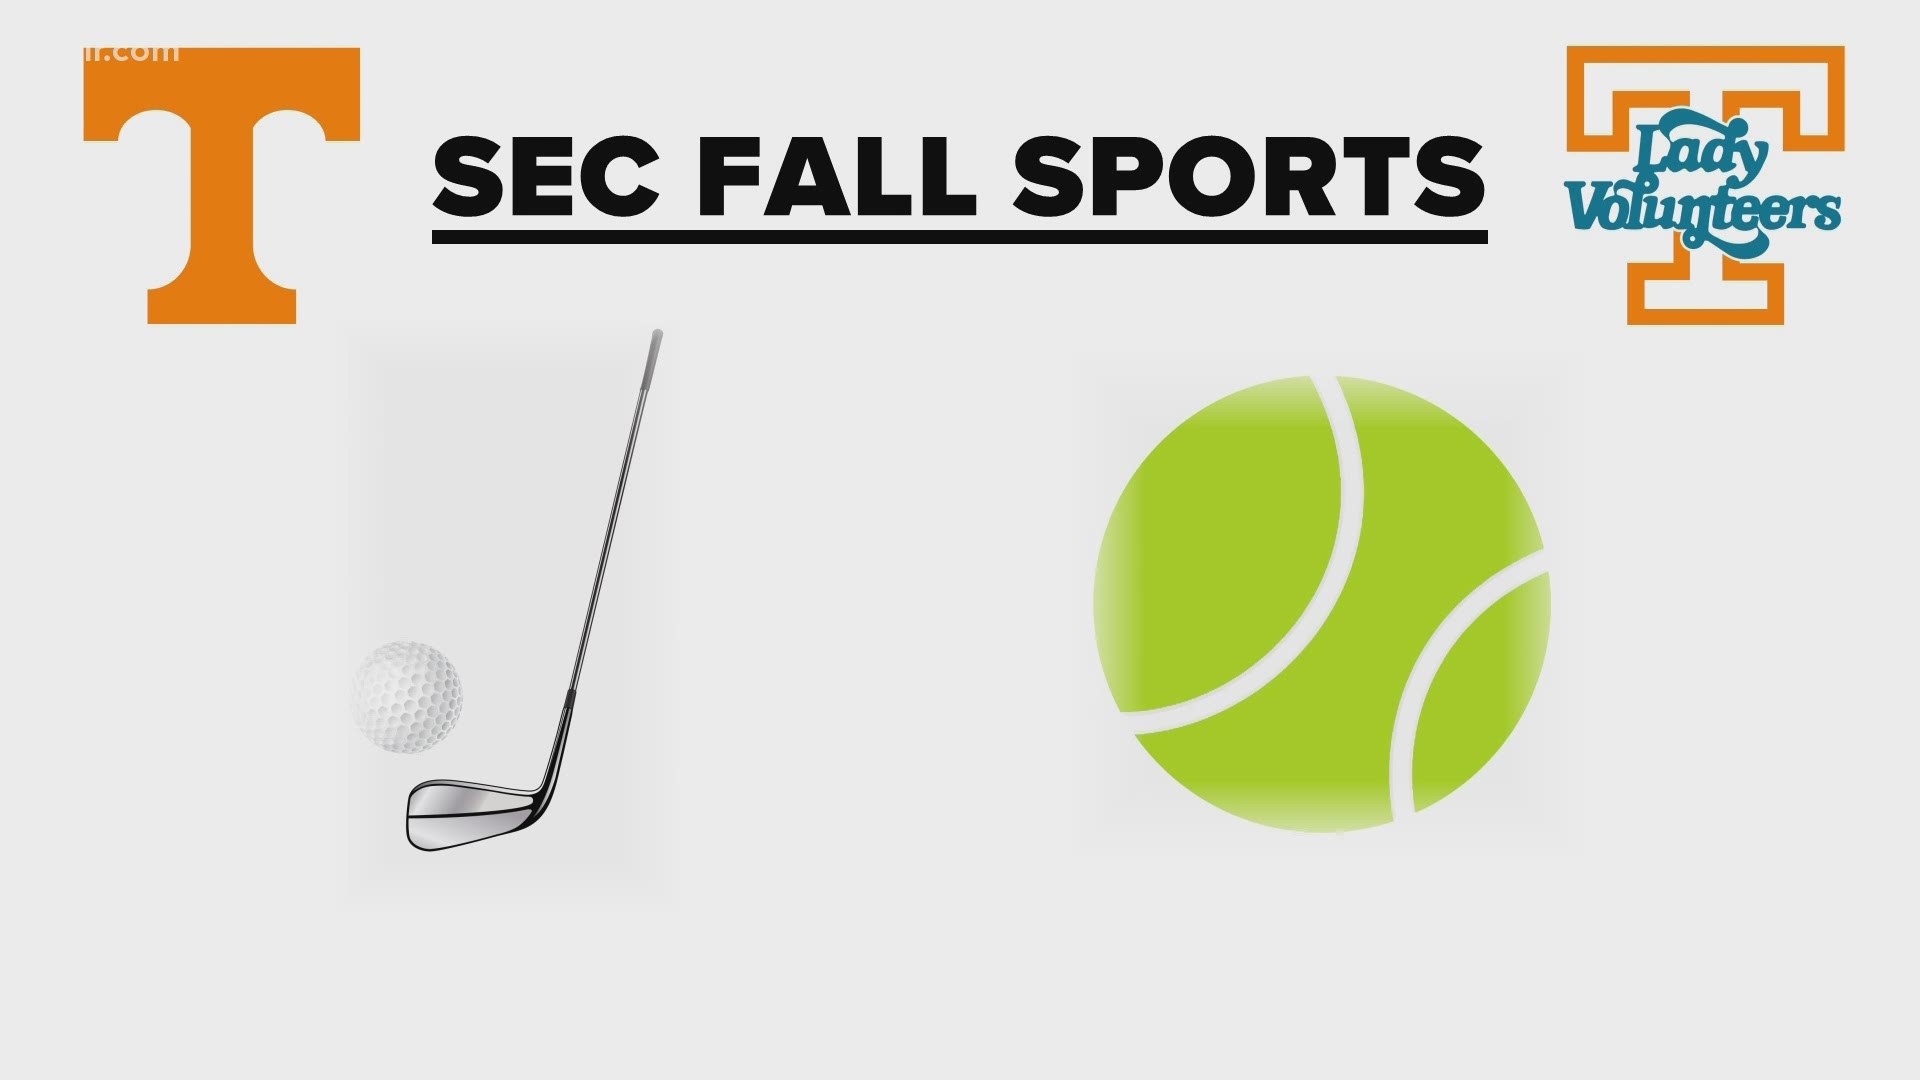 While much of the focus these past few months has been on college football, fans shouldn't forget about fall Olympic sports.